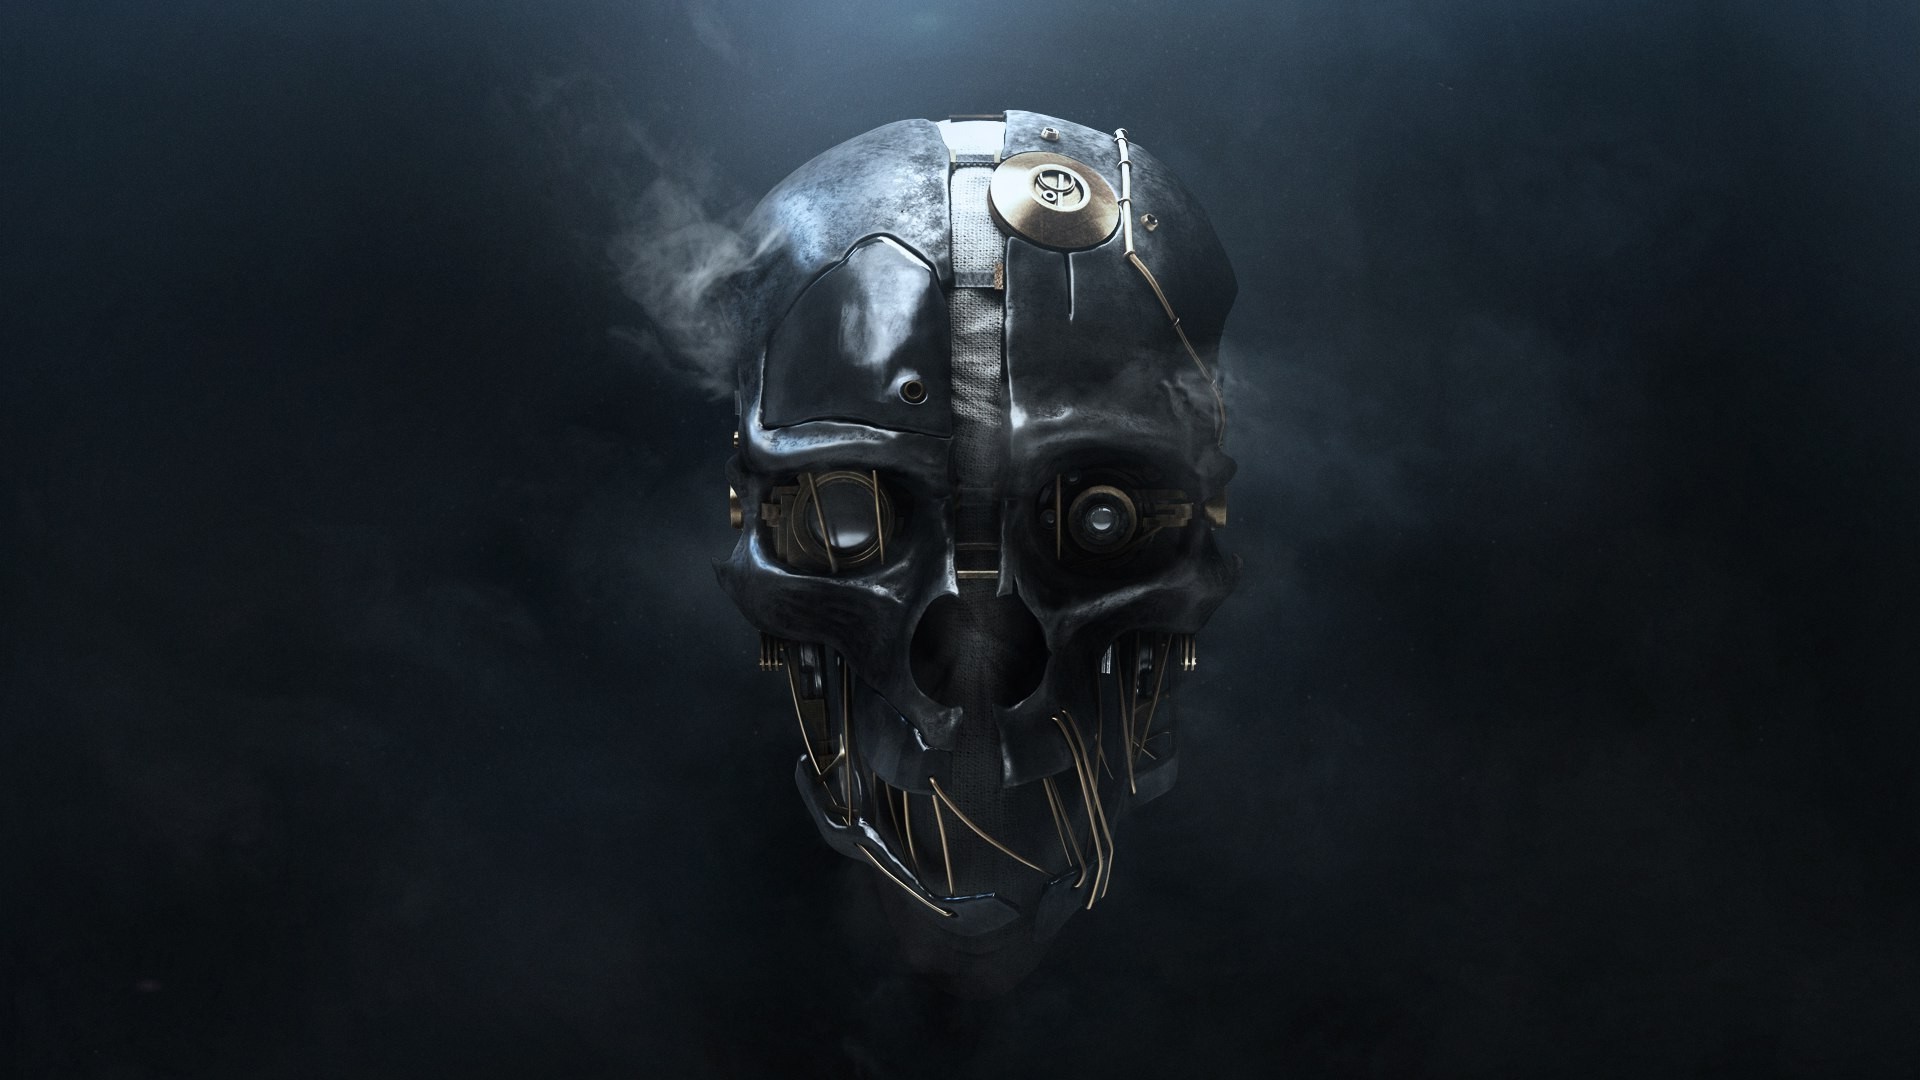 skull, Simple Background, 3D, Metal, Wires, Smoke, Technology, Dishonored, Video Games, Corvo Attano Wallpaper